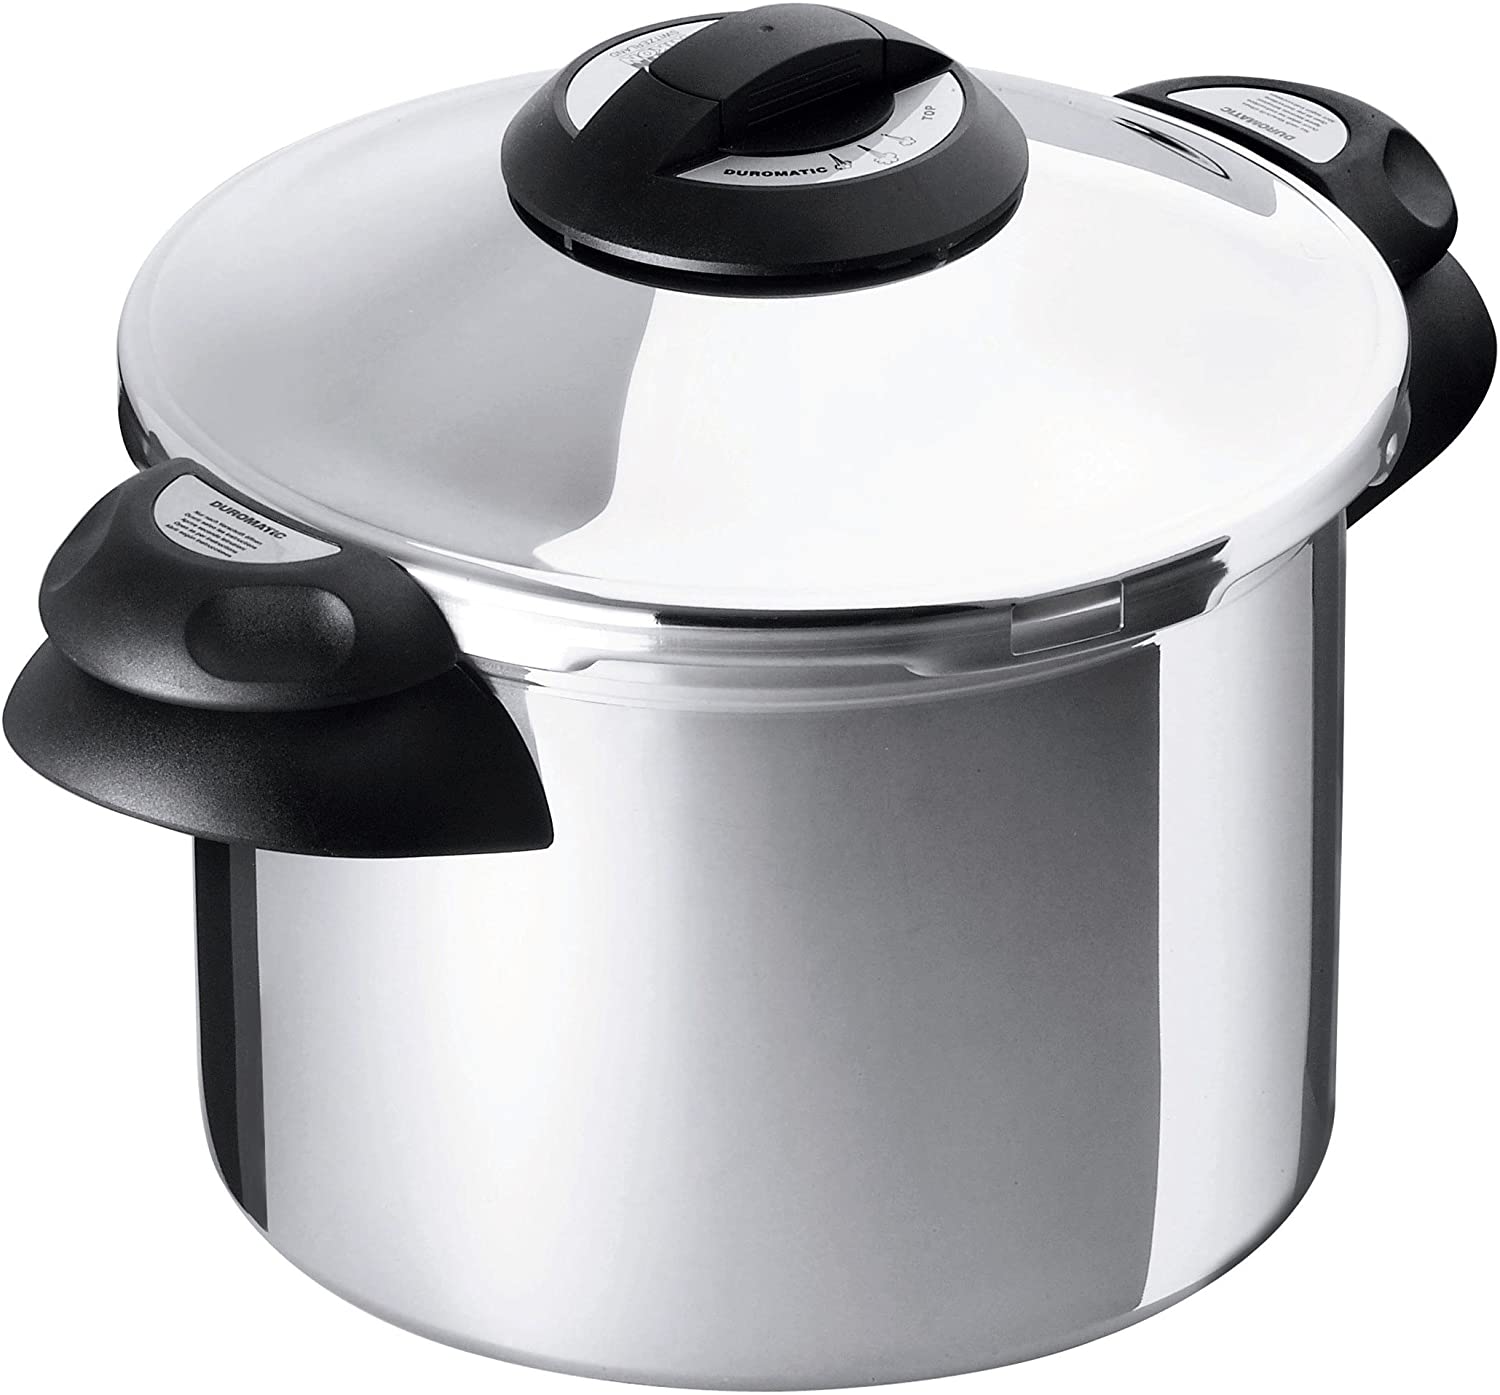 Kuhn Rikon Duromatic Top Pressure Cooker With Side Grips (22 cm), 4.0 Litre